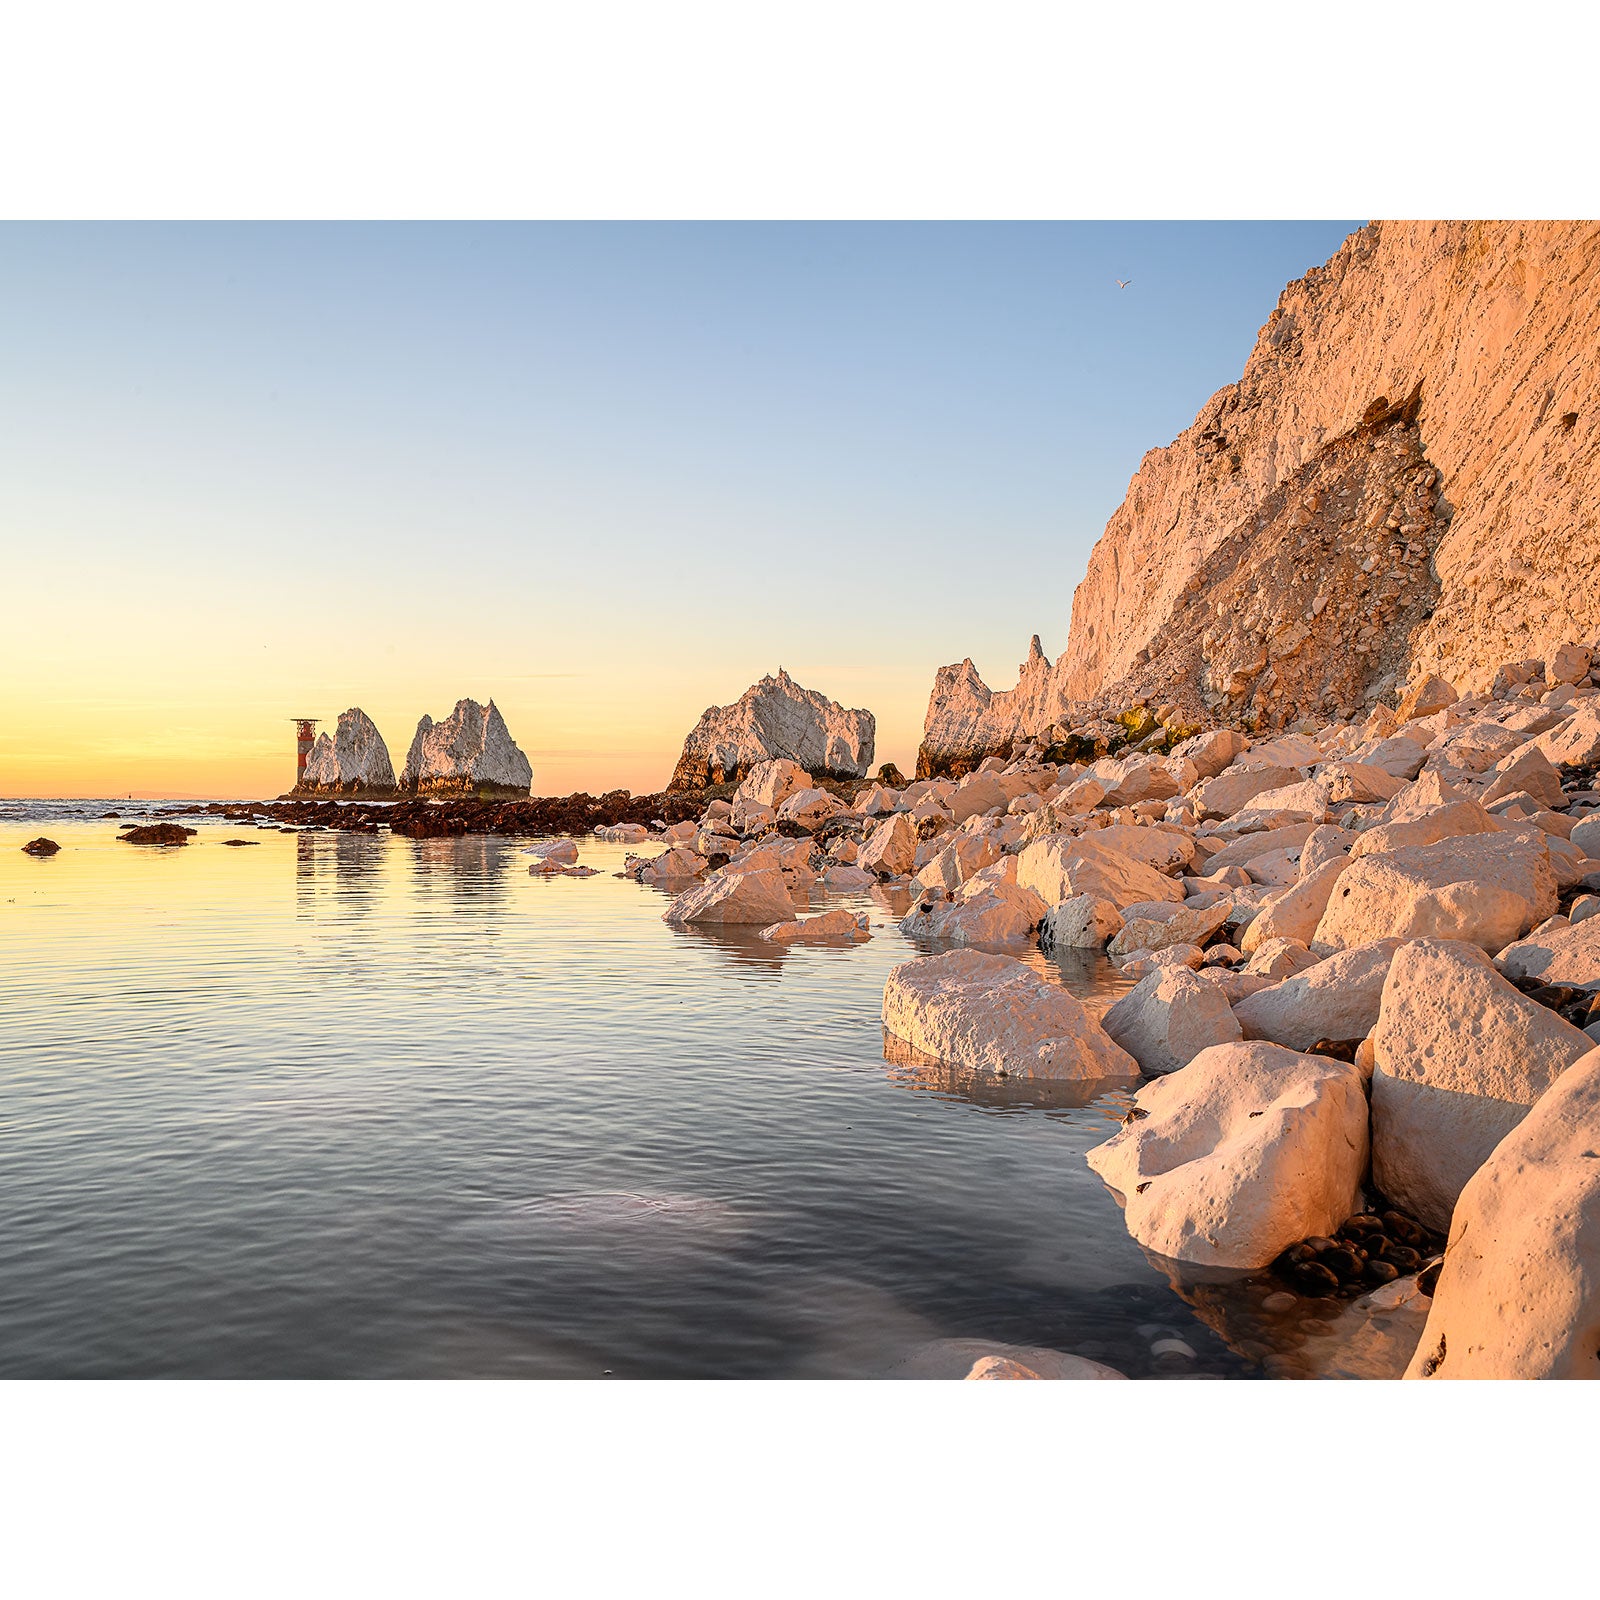 Rocky shore illuminated by golden sunset light with The Needles sea stacks in the distance on the Isle of Wight, captured by Available Light Photography.